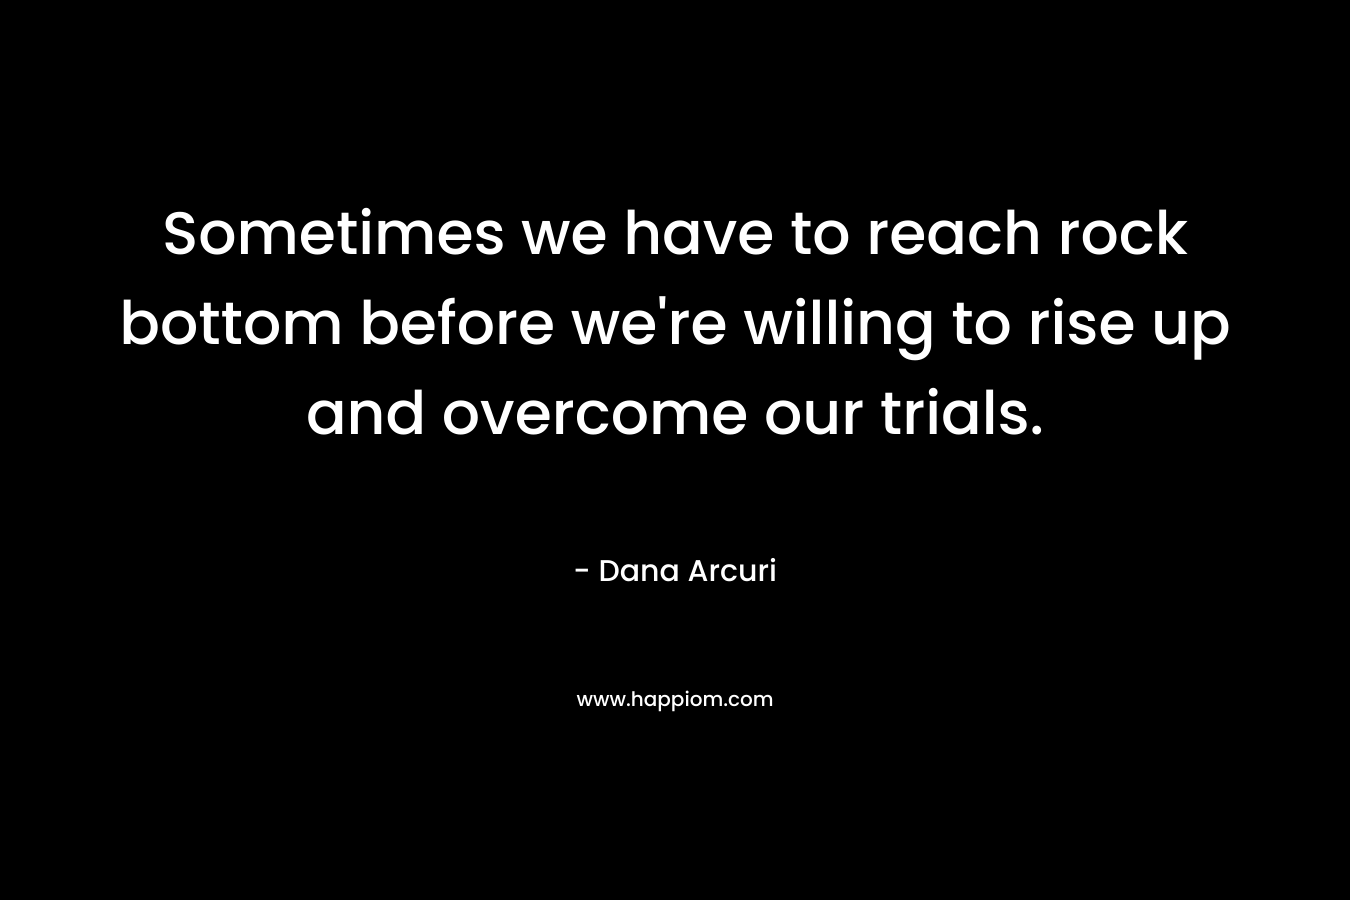 Sometimes we have to reach rock bottom before we’re willing to rise up and overcome our trials. – Dana Arcuri